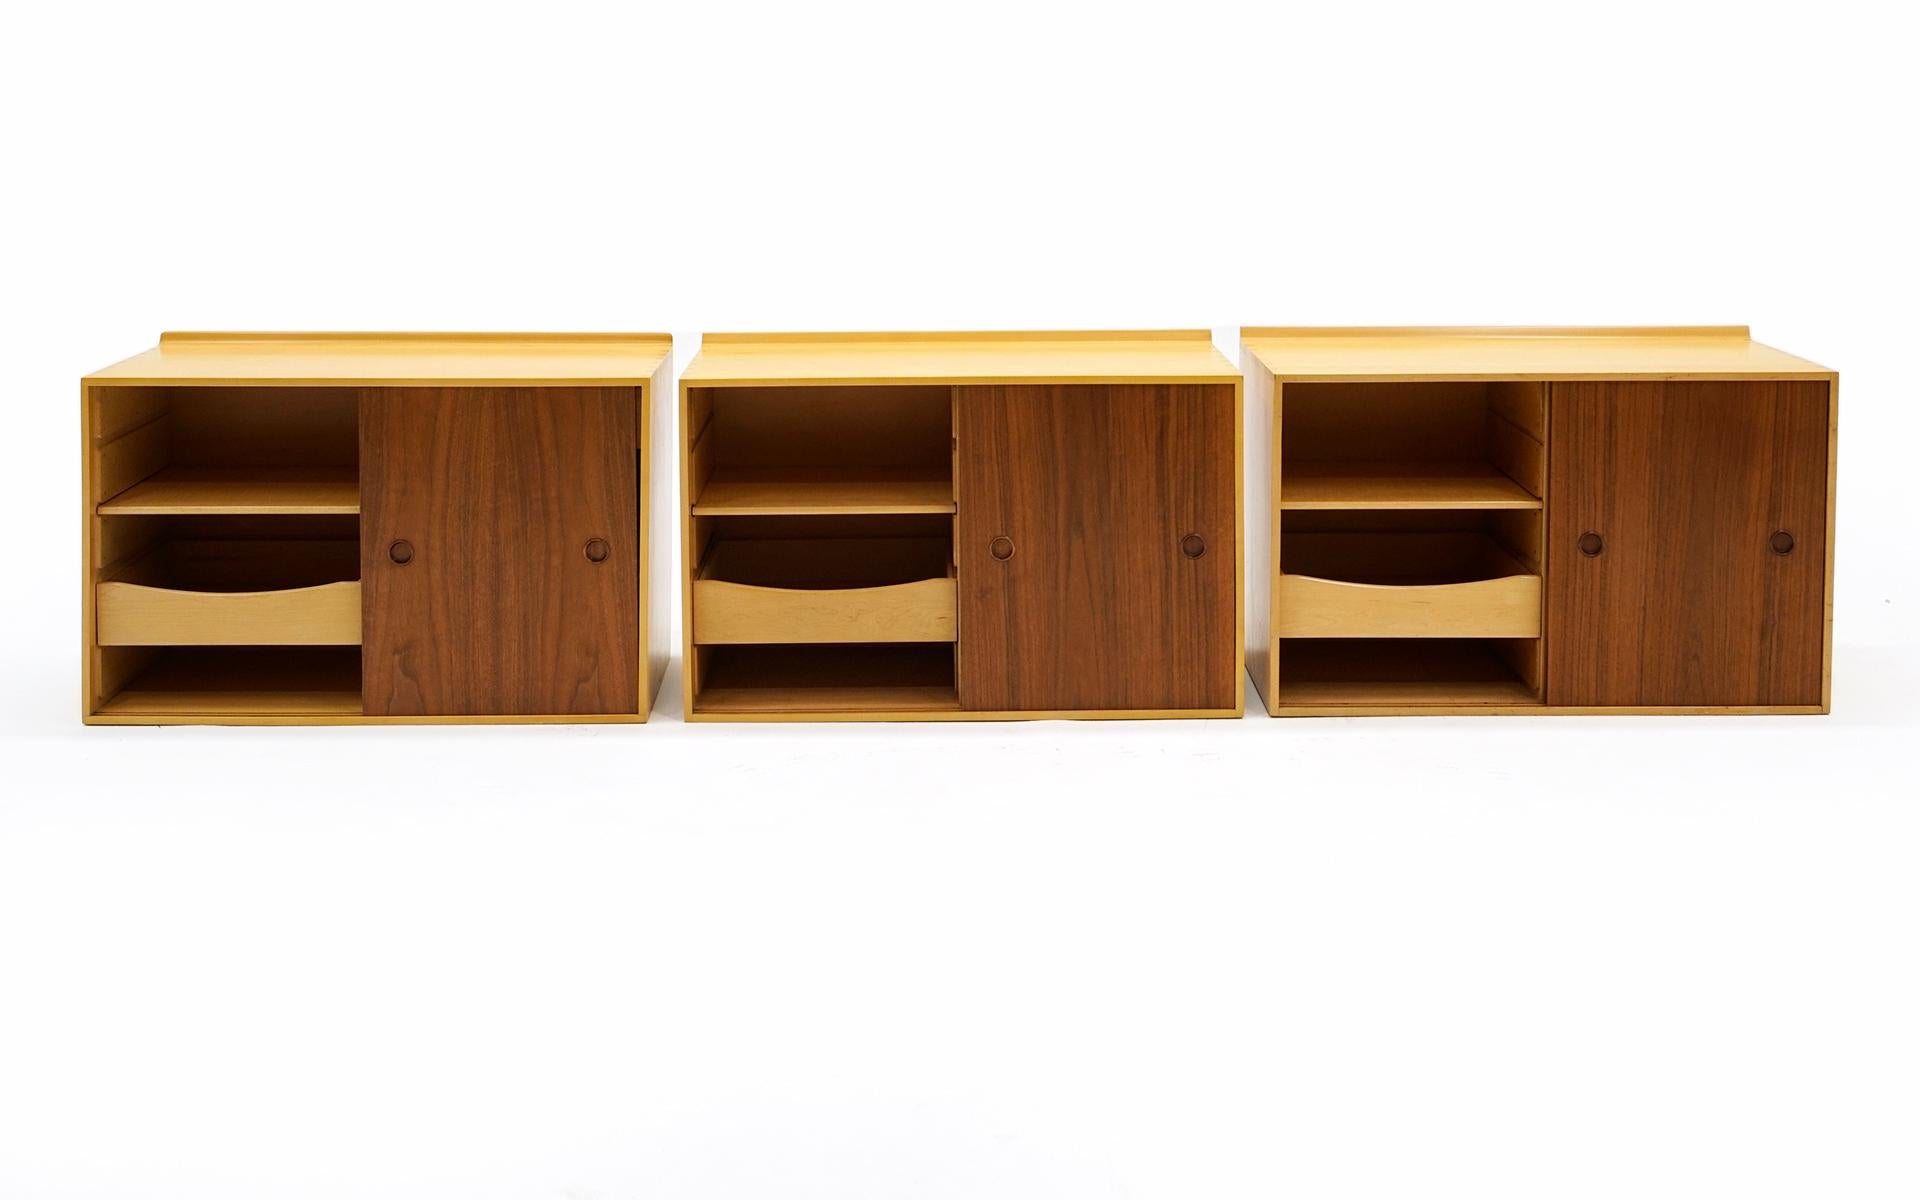 American Wall Mounted Cabinets by Finn Juhl for Baker, Walnut and Birch, Great Condition For Sale